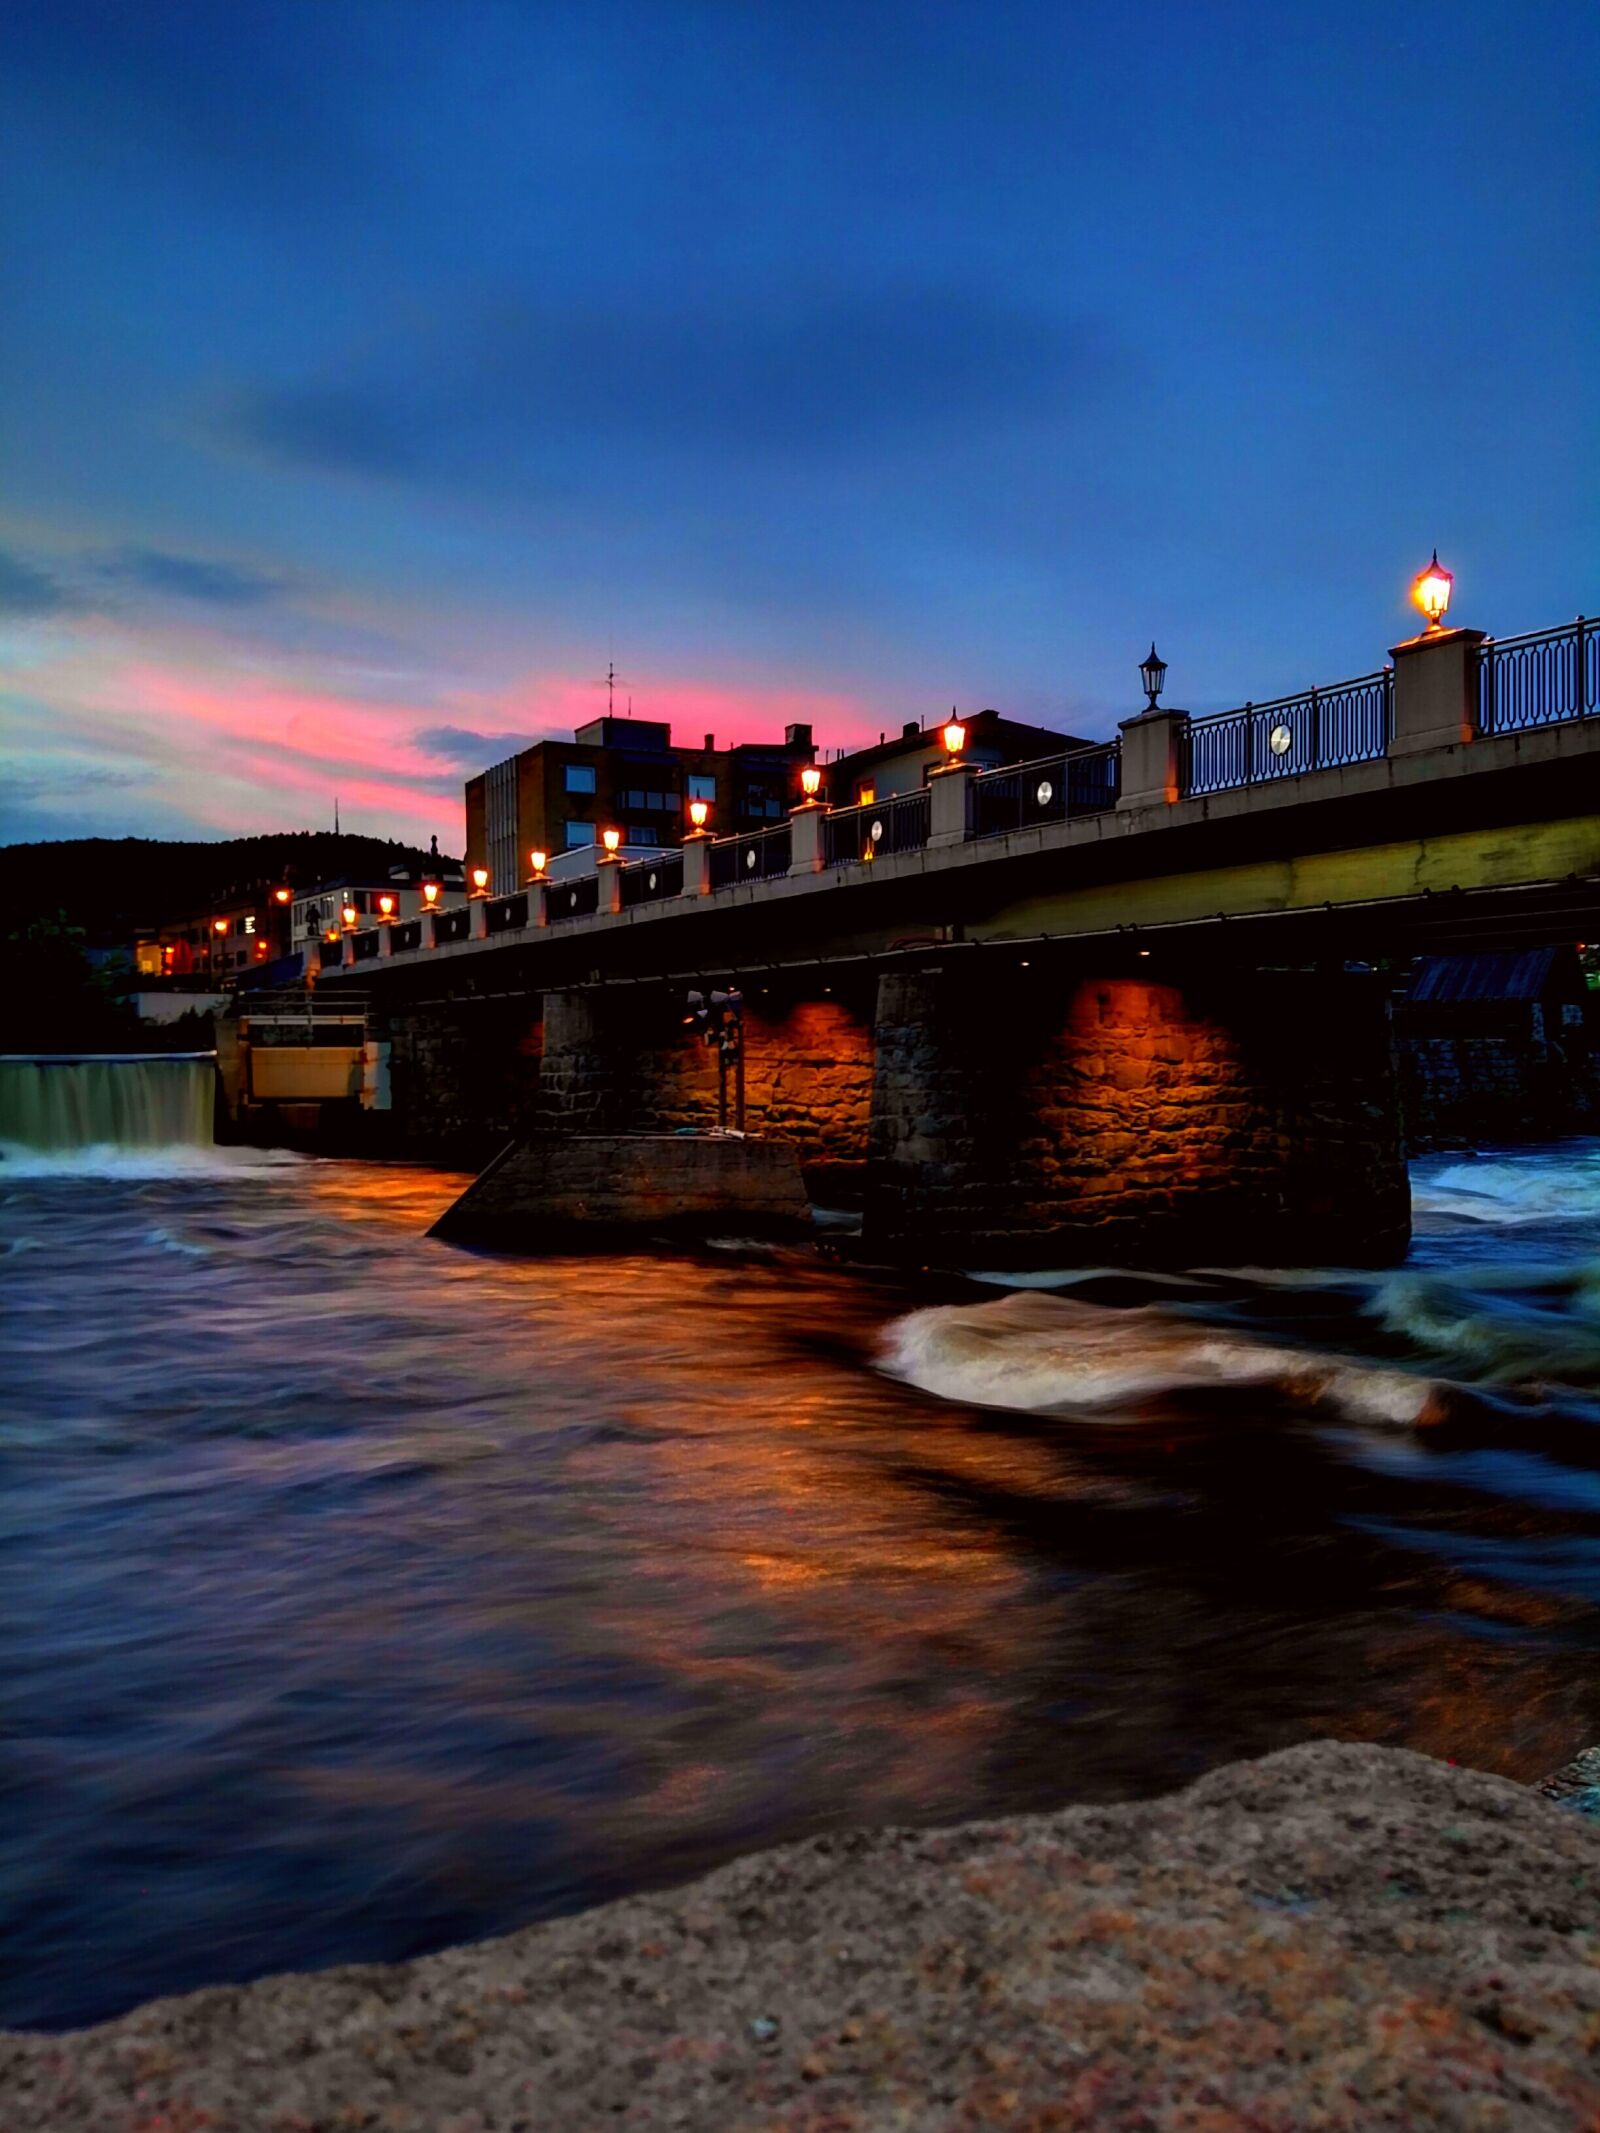 HUAWEI GRA-L09 sample photo. Kongsberg, the river numedalsl photography